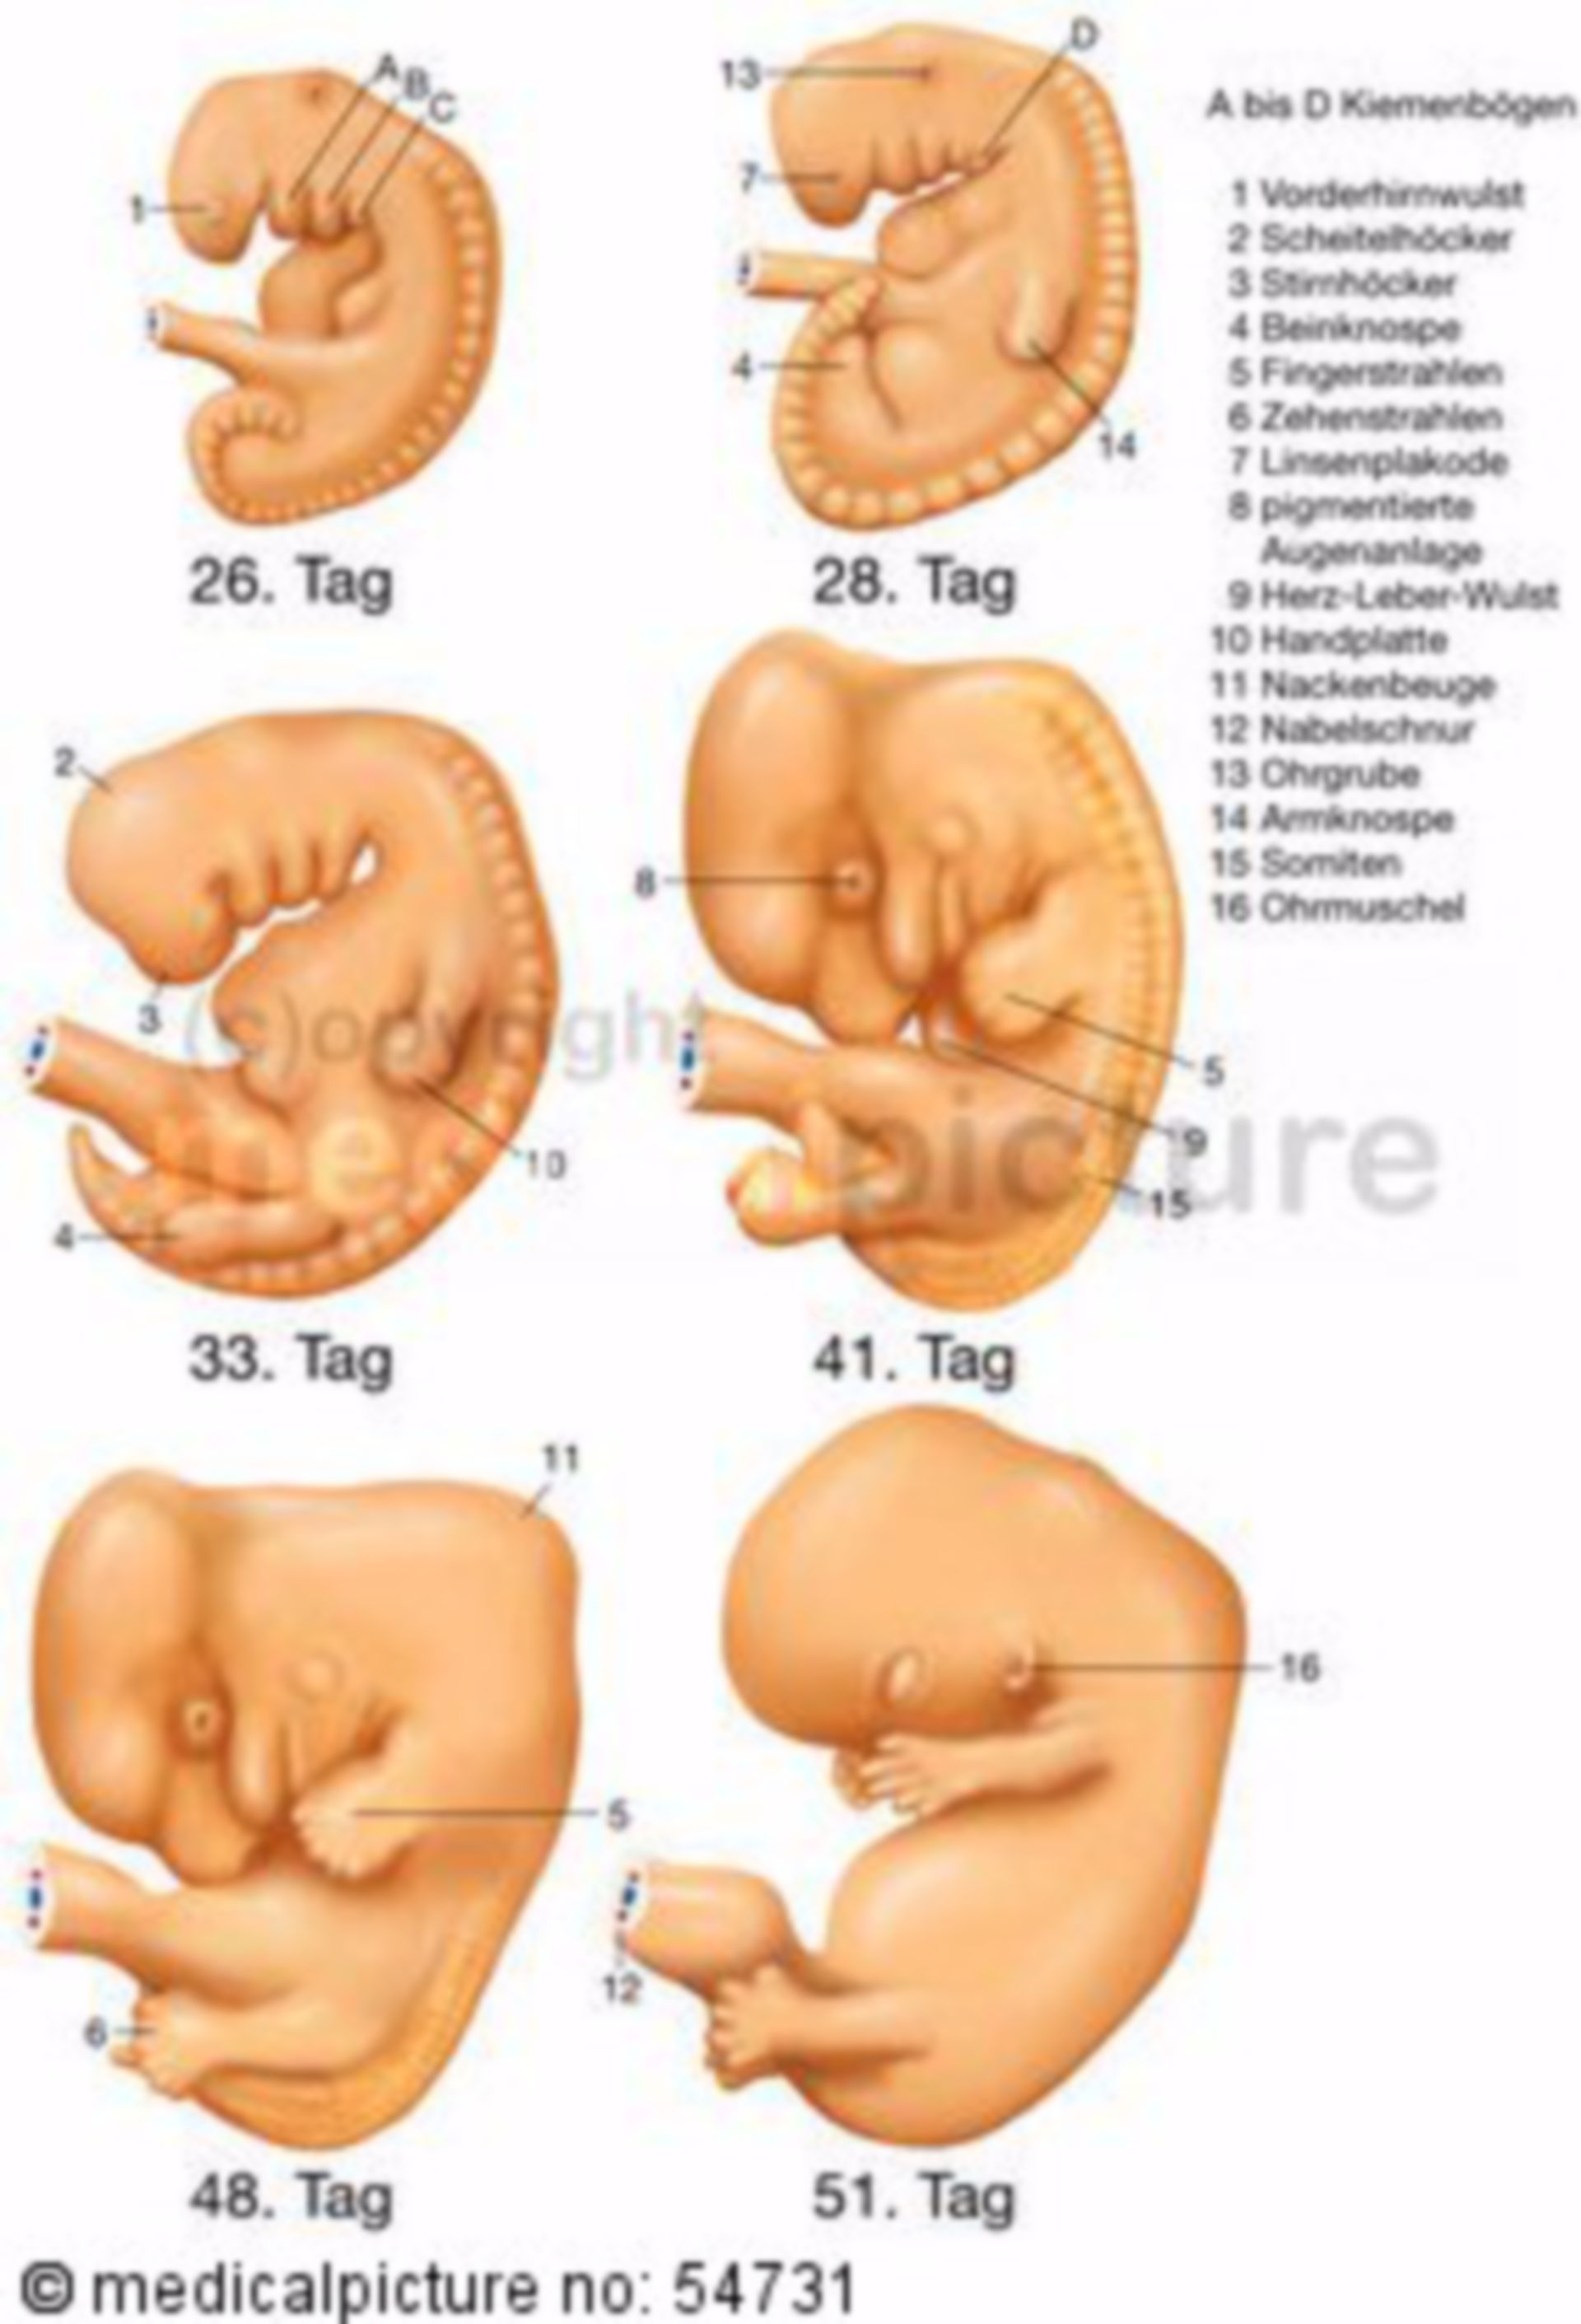 Embryo, developments stages